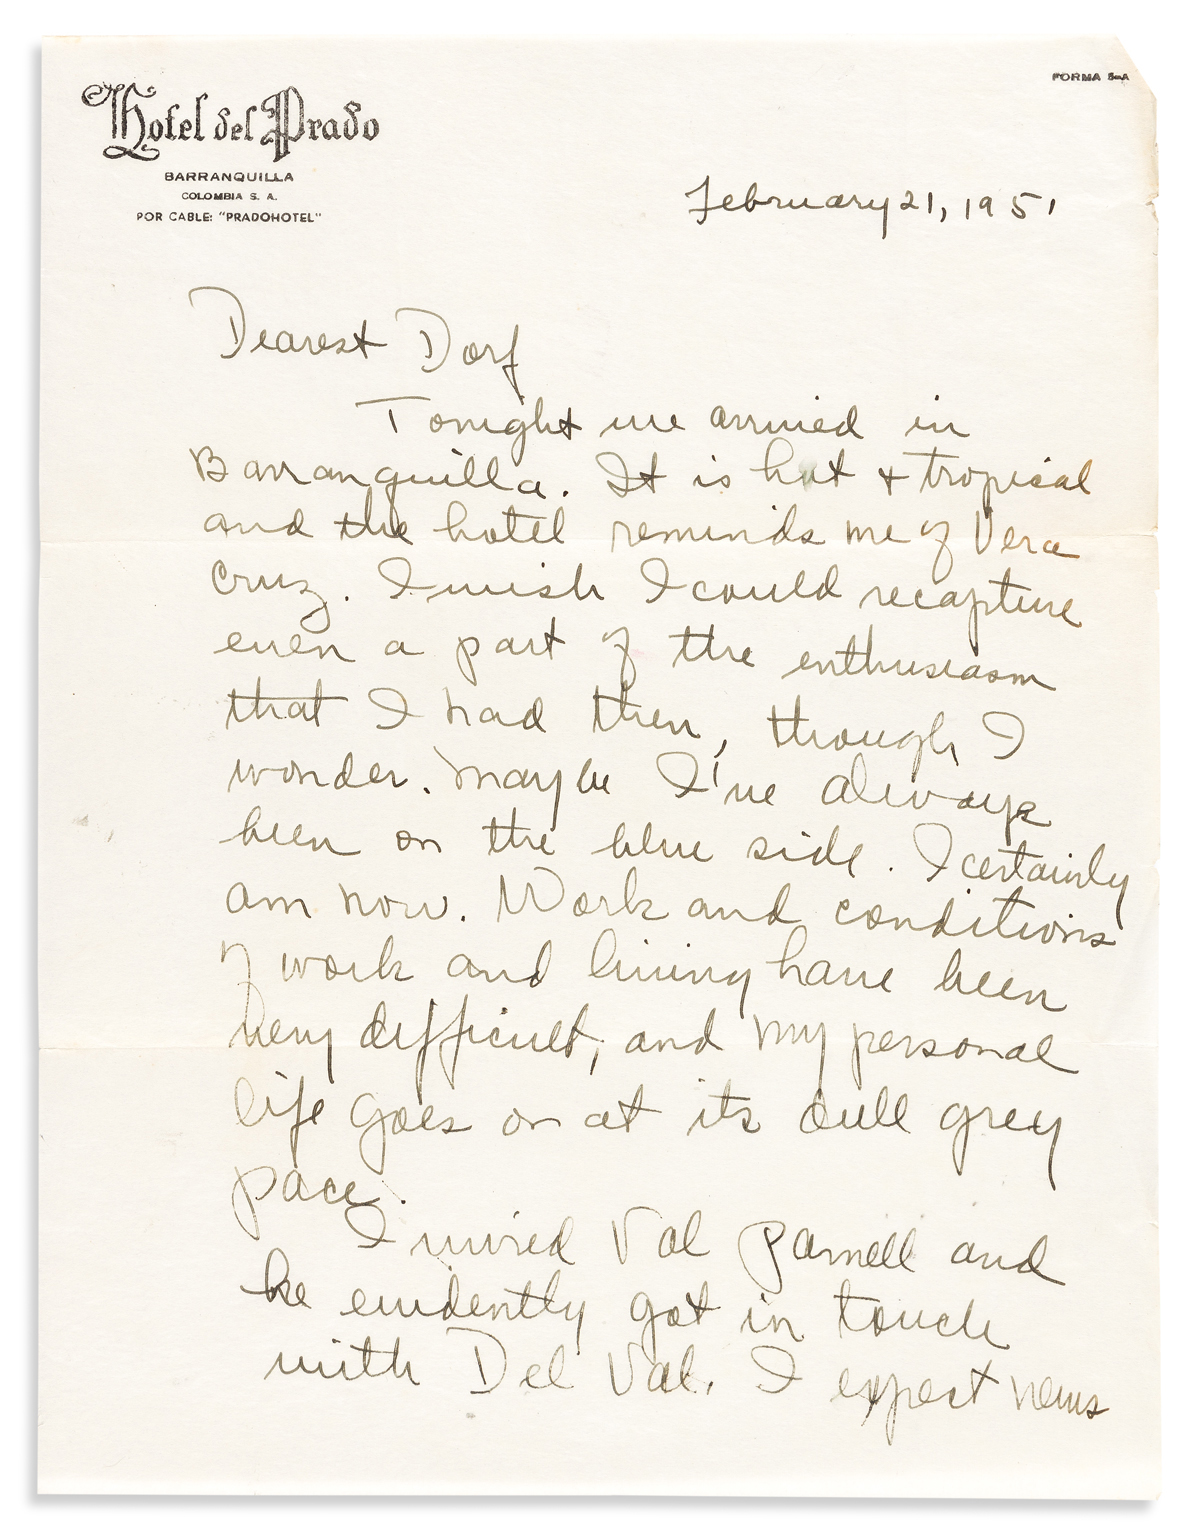 Dunham, Katherine (1909-2006) Small Archive of Letters and Other Correspondence, 1948-1957.